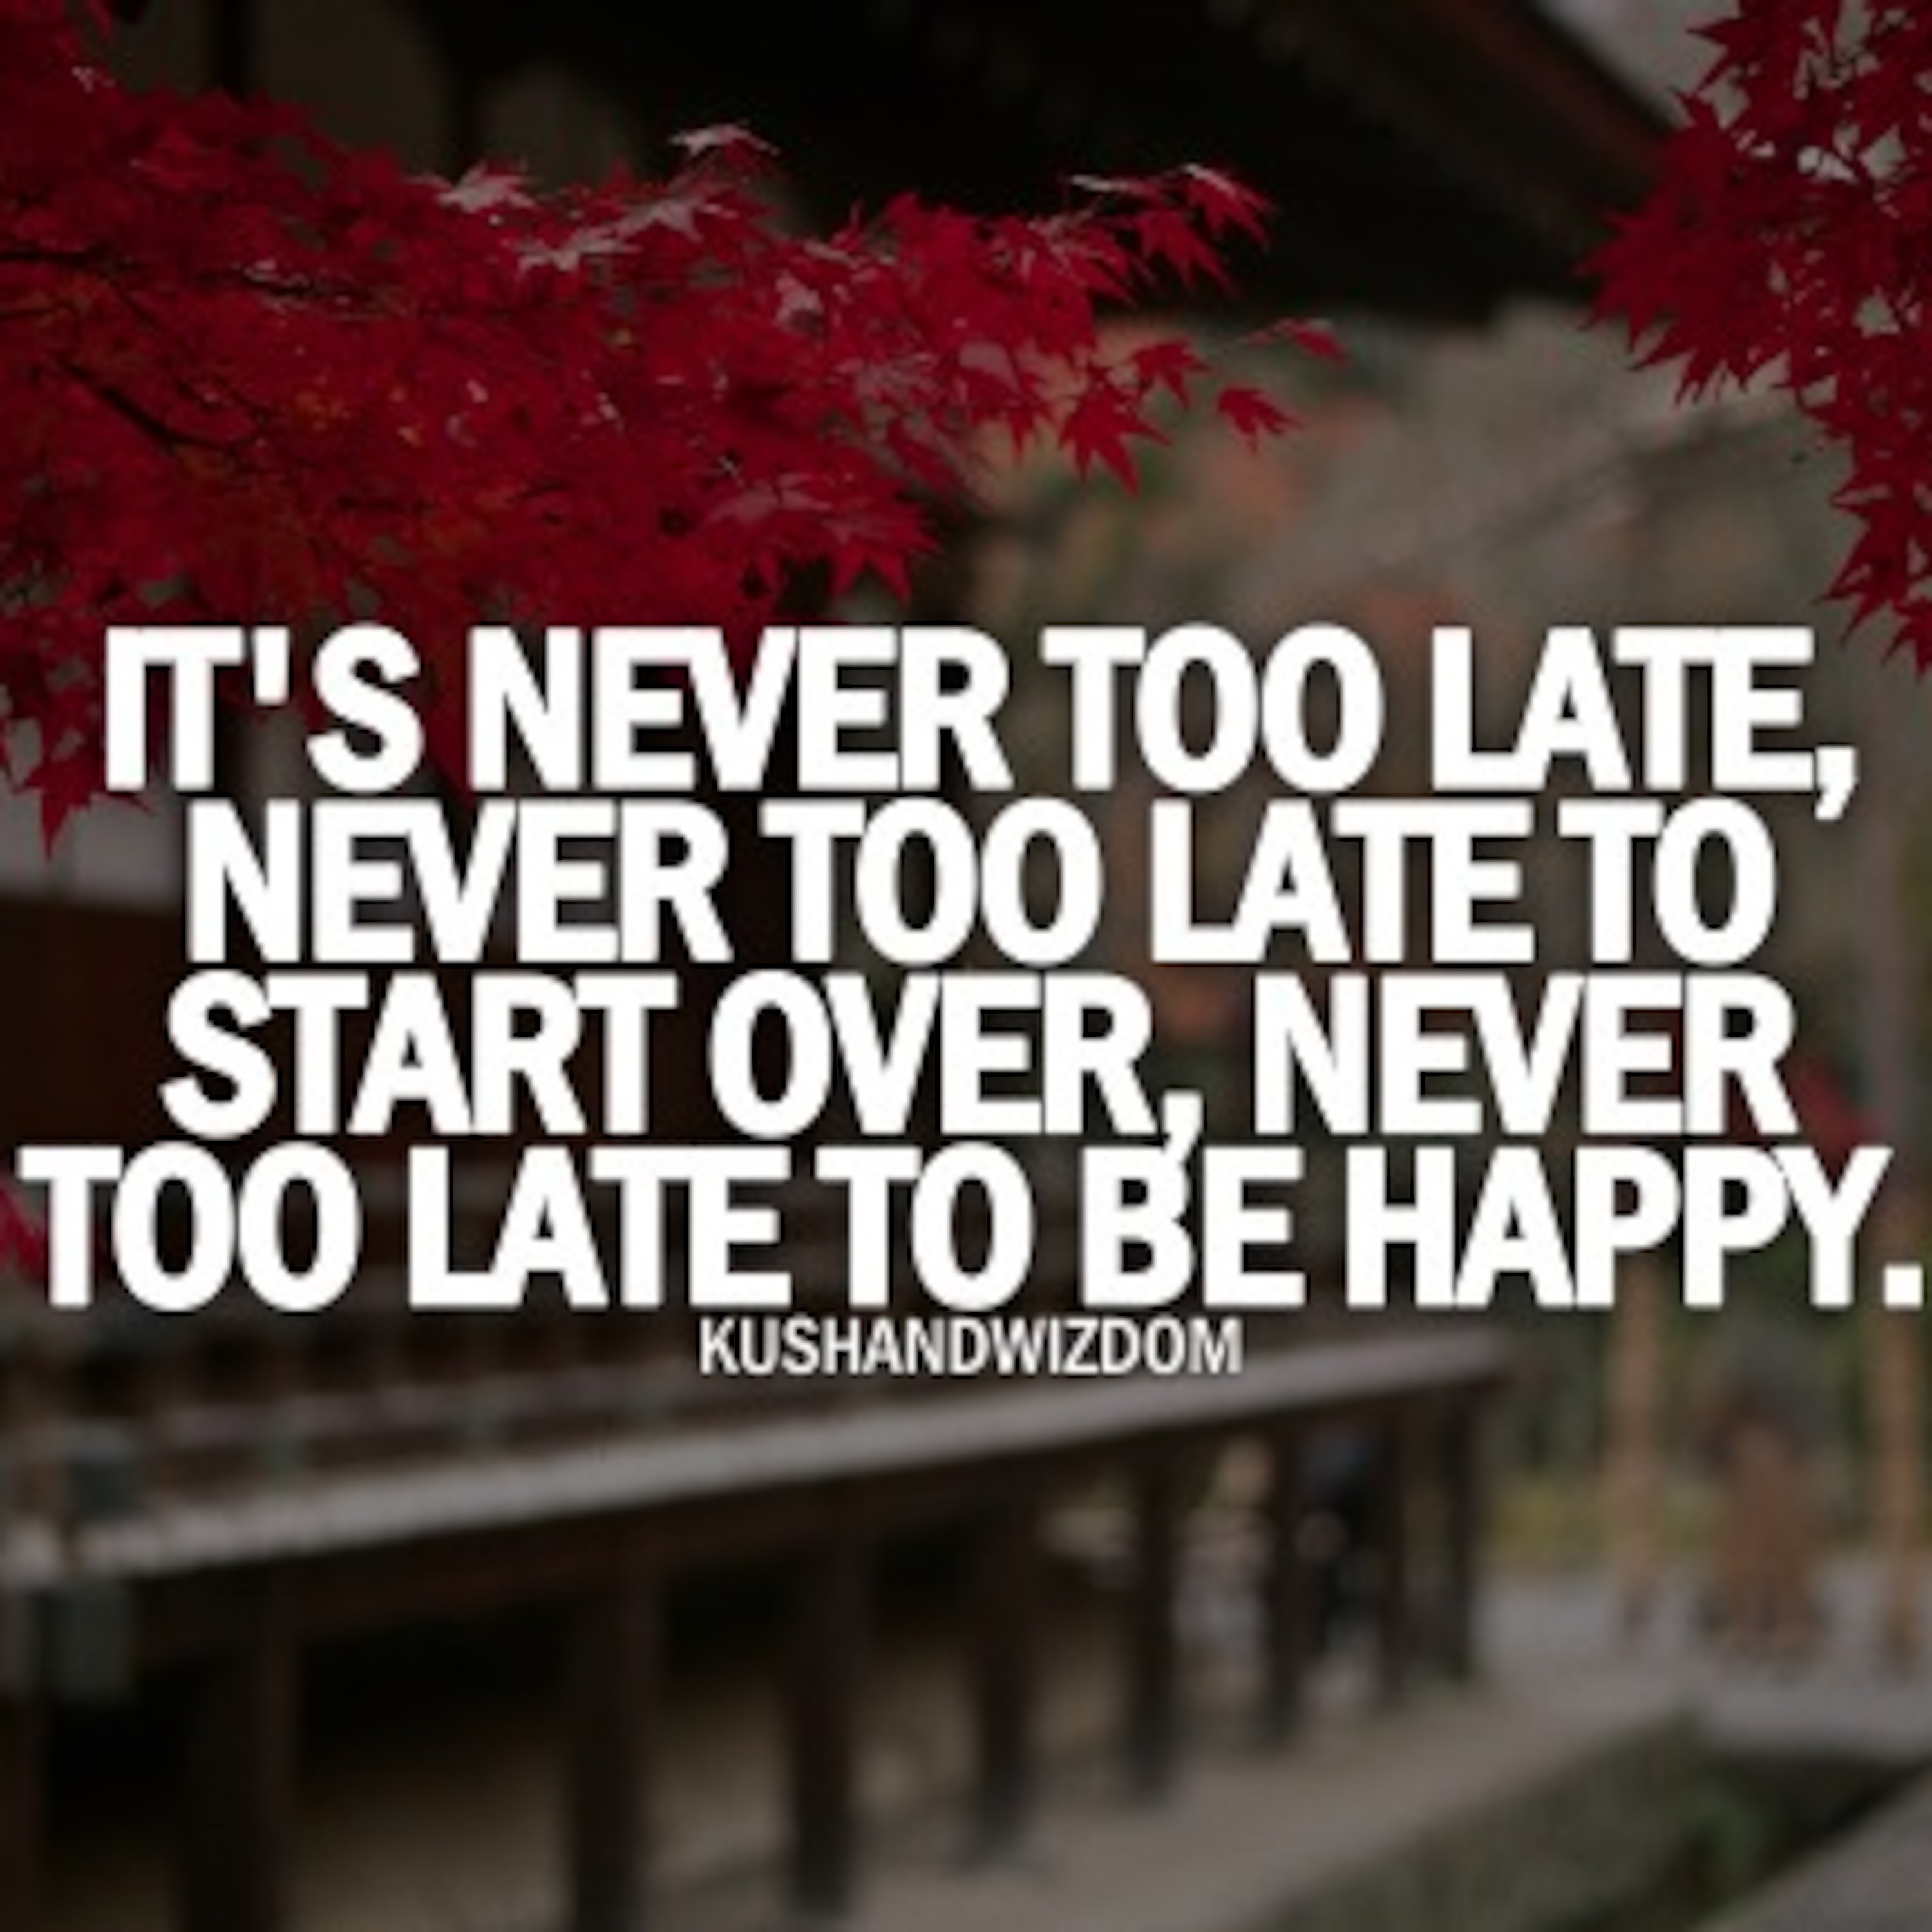 It is never too. Quotes about being too late. Never late to be Happy. It's never too late to start over. Never to late.